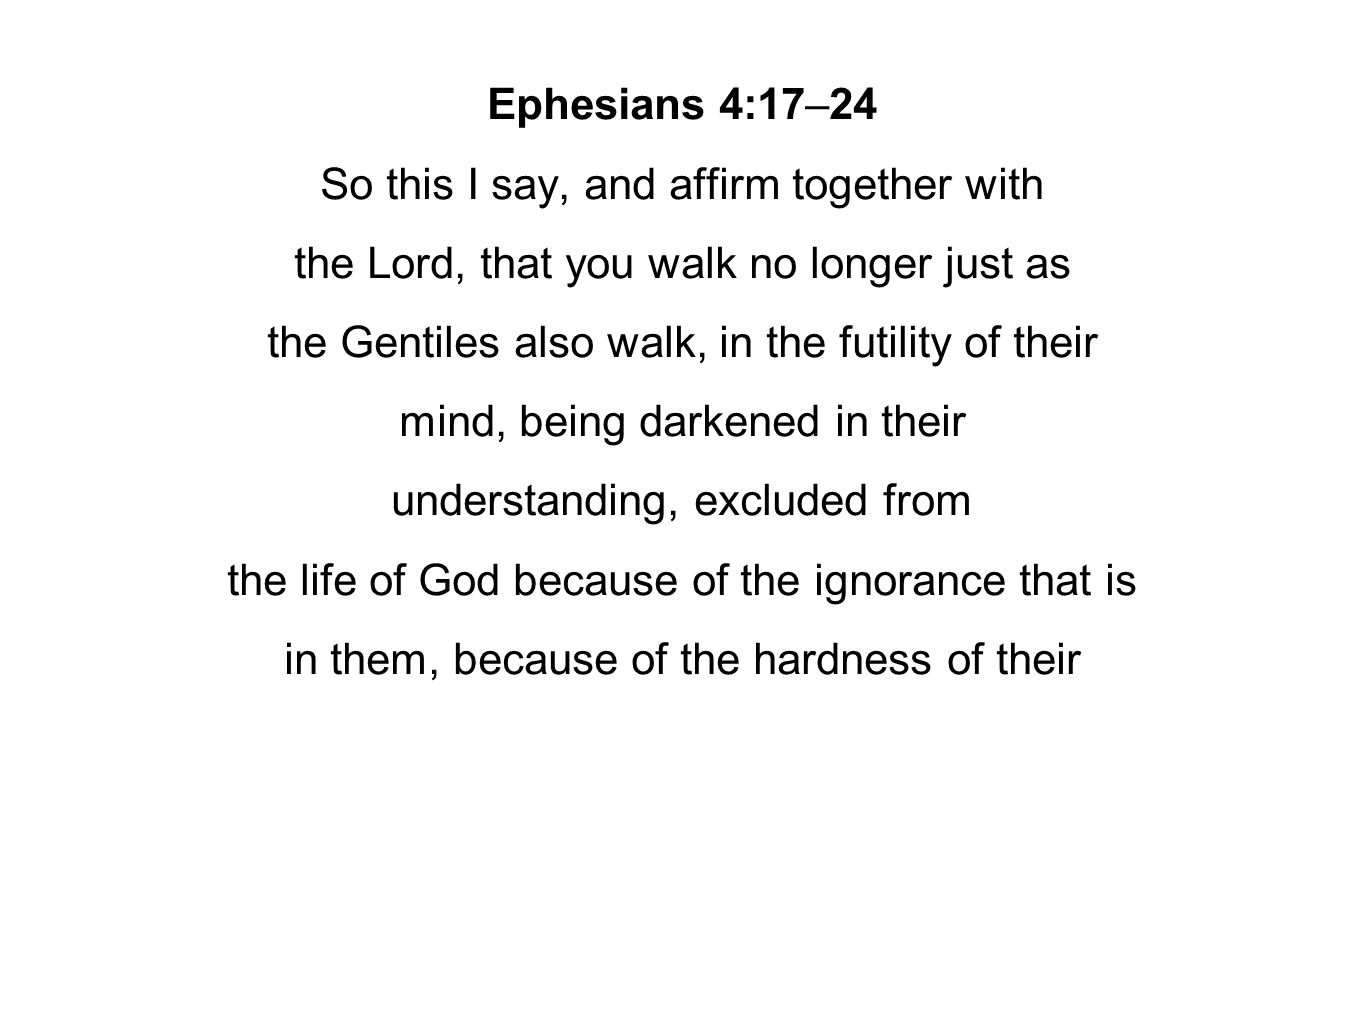 Ephesians 4:17–24 So this I say, and affirm together with the Lord, that you walk no longer just as the Gentiles also walk, in the futility of their mind, being darkened in their understanding, excluded from the life of God because of the ignorance that is in them, because of the hardness of their